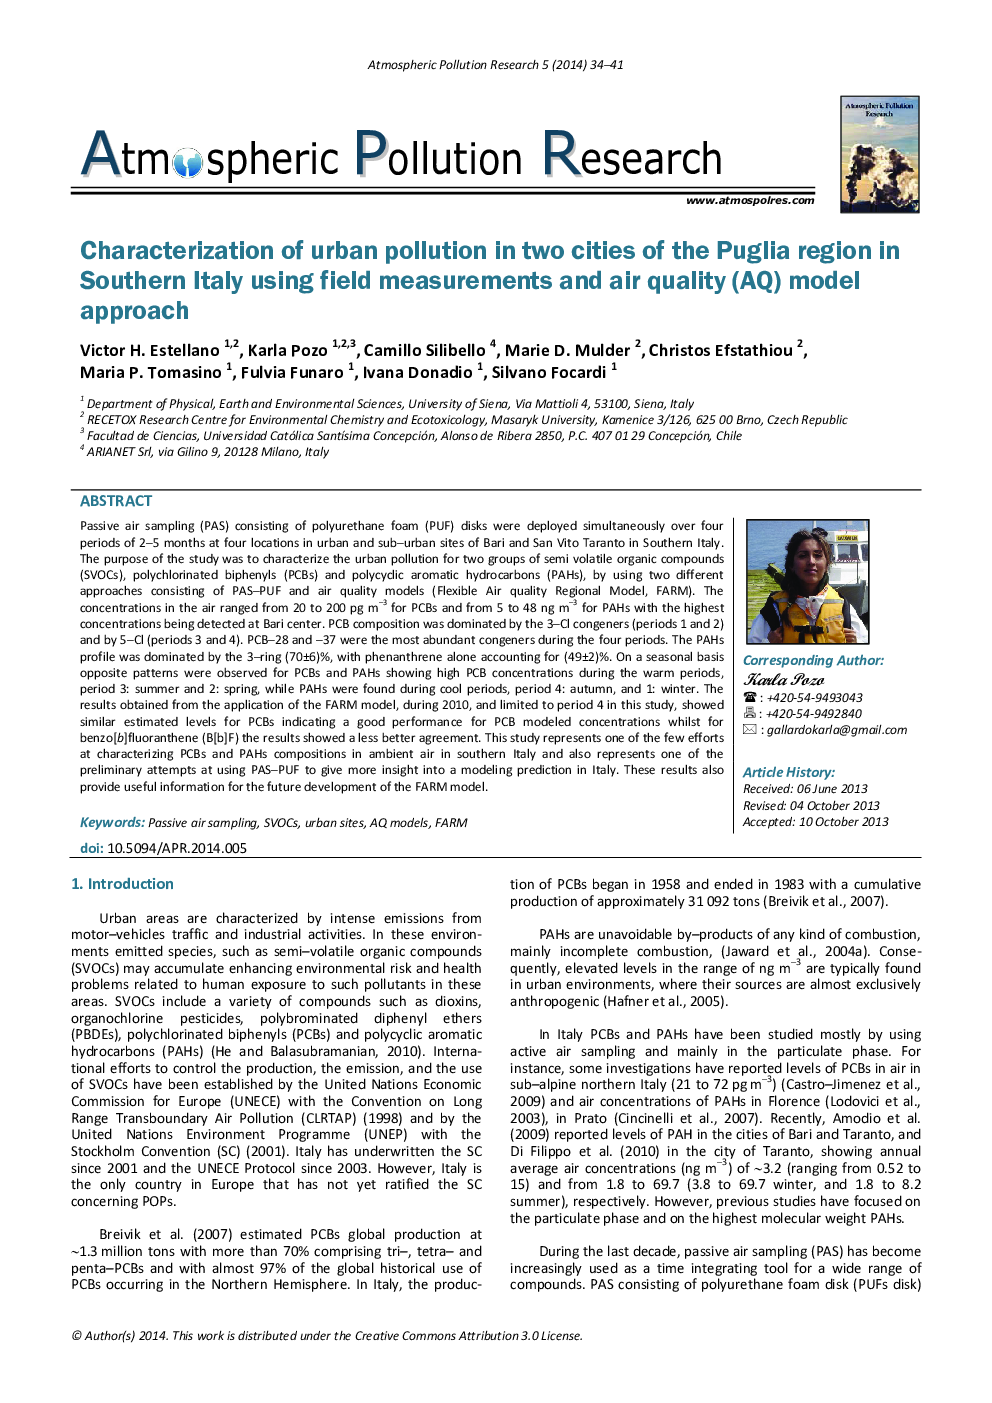 Characterization of urban pollution in two cities of the Puglia region in Southern Italy using field measurements and air quality (AQ) model approach